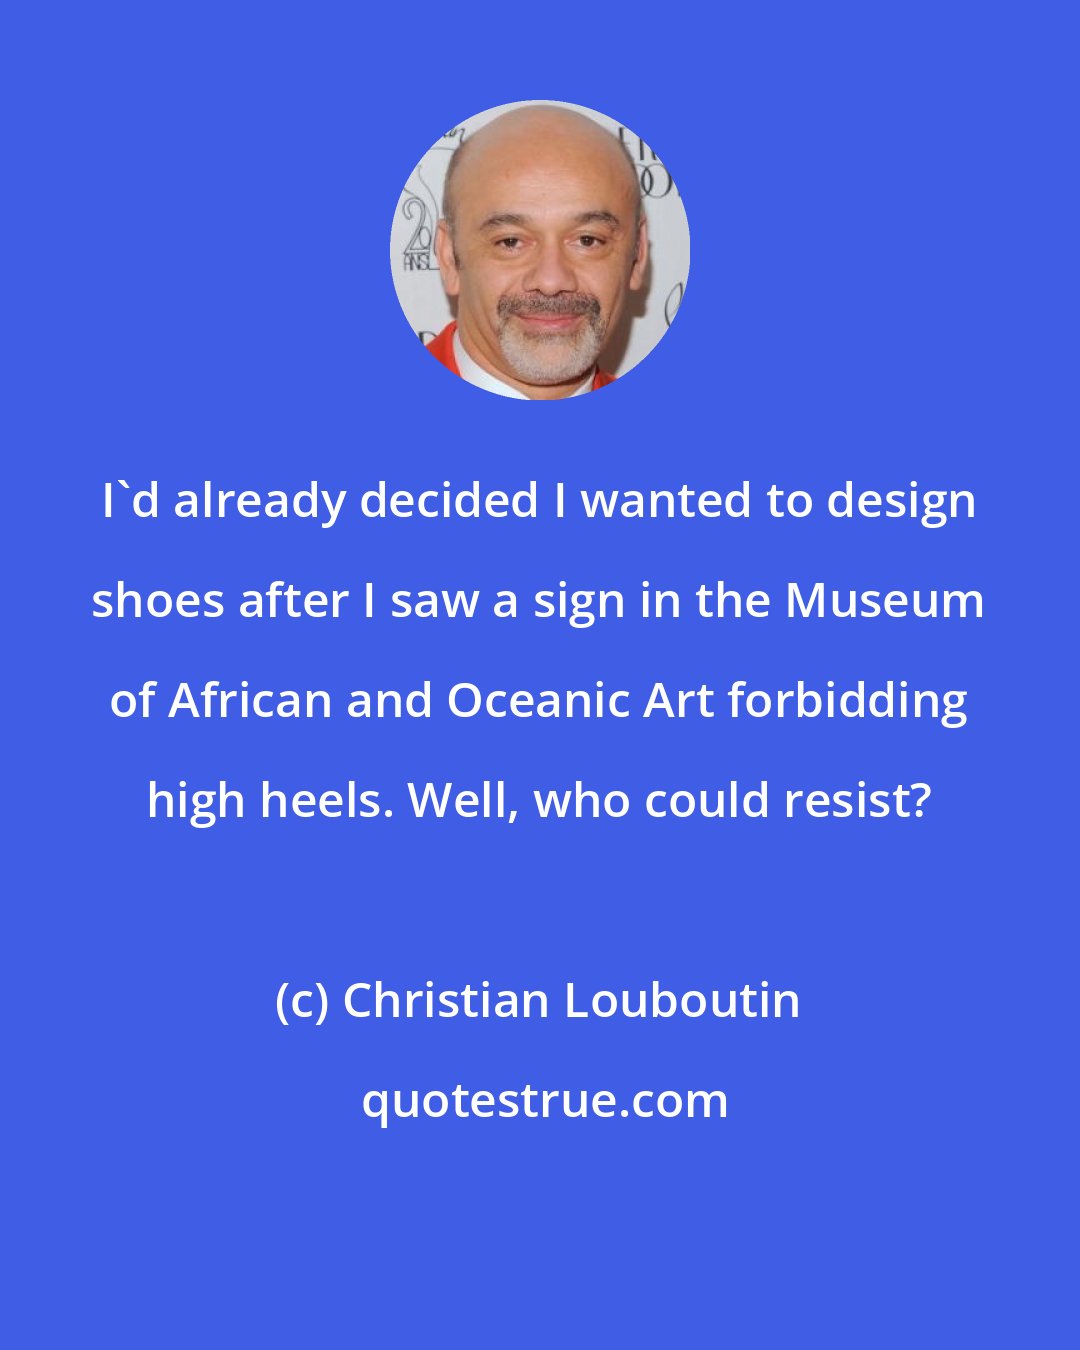 Christian Louboutin: I'd already decided I wanted to design shoes after I saw a sign in the Museum of African and Oceanic Art forbidding high heels. Well, who could resist?